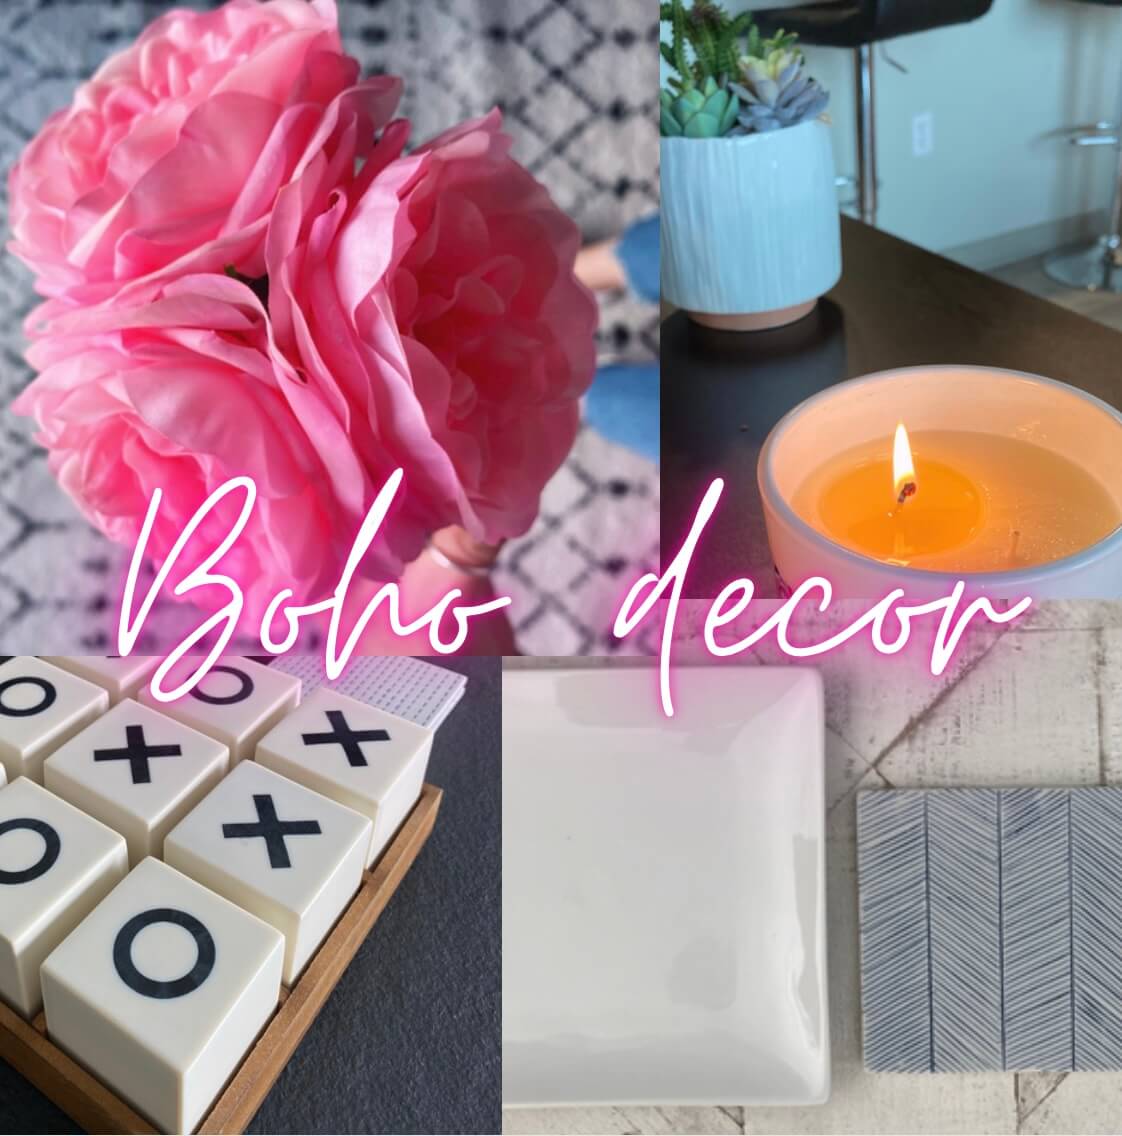 Collage of decorative pieces with boho decor written across in word art